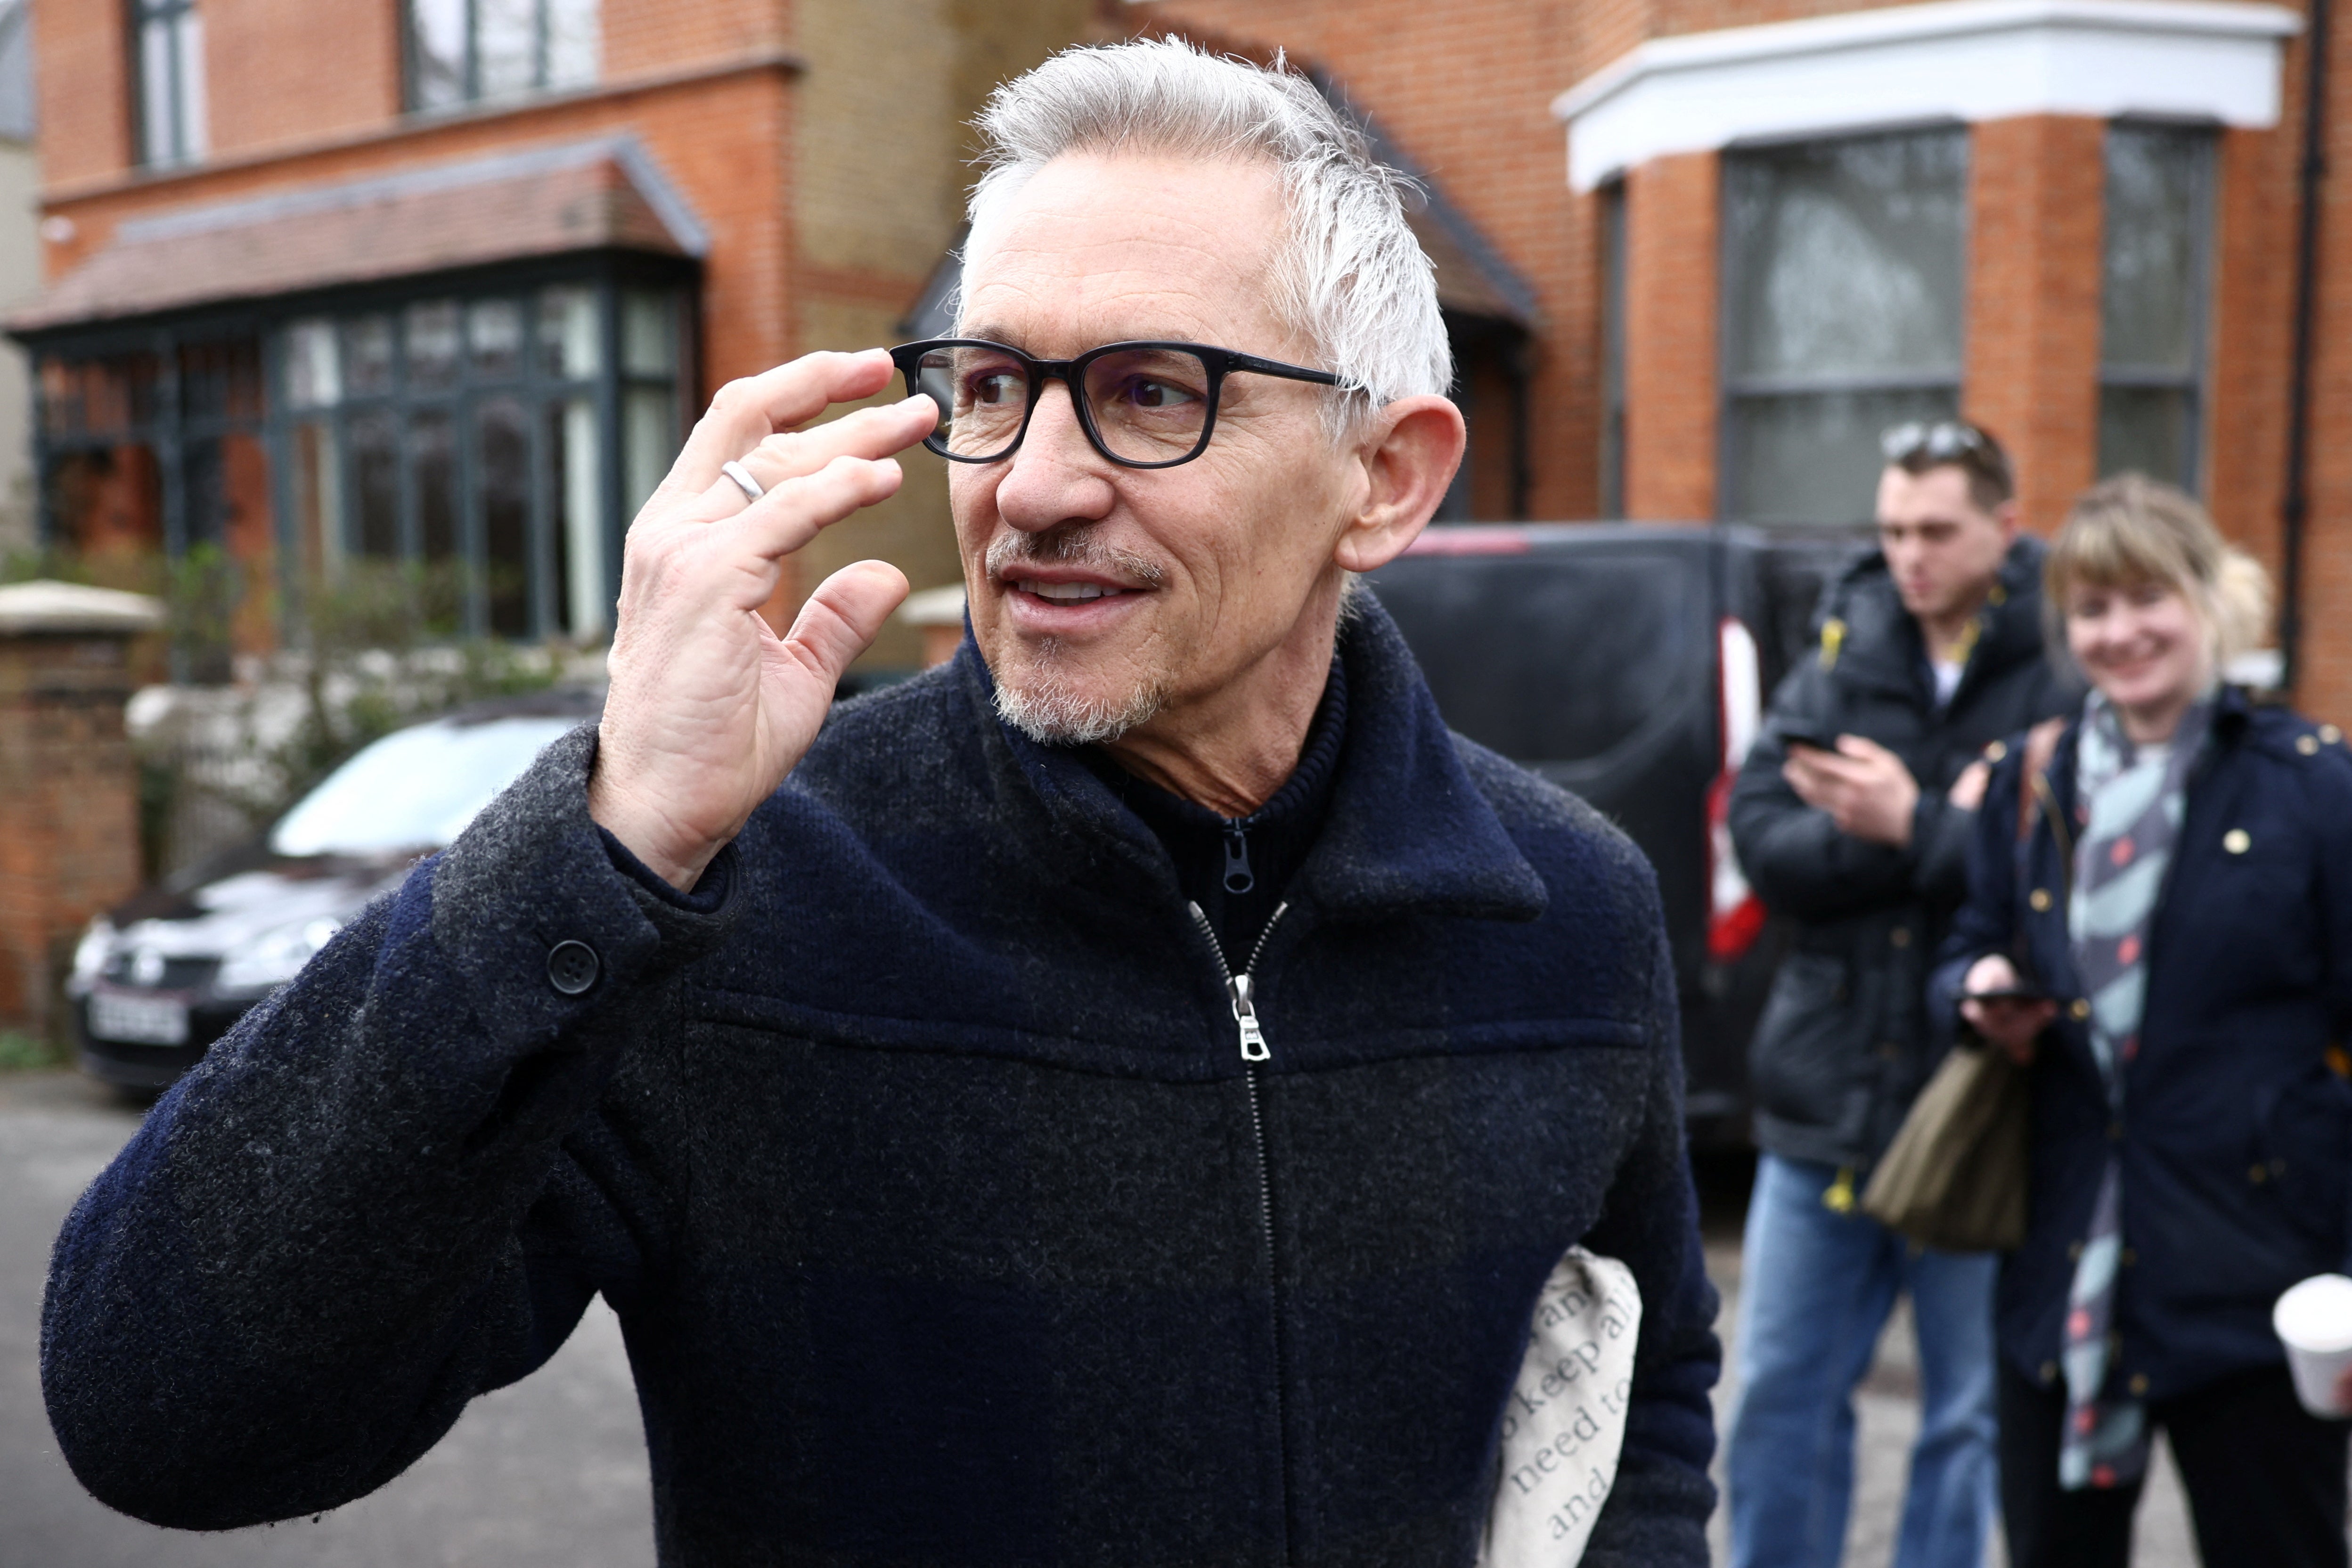 We suffered an outbreak of ‘licenses’, thanks to the Lineker story